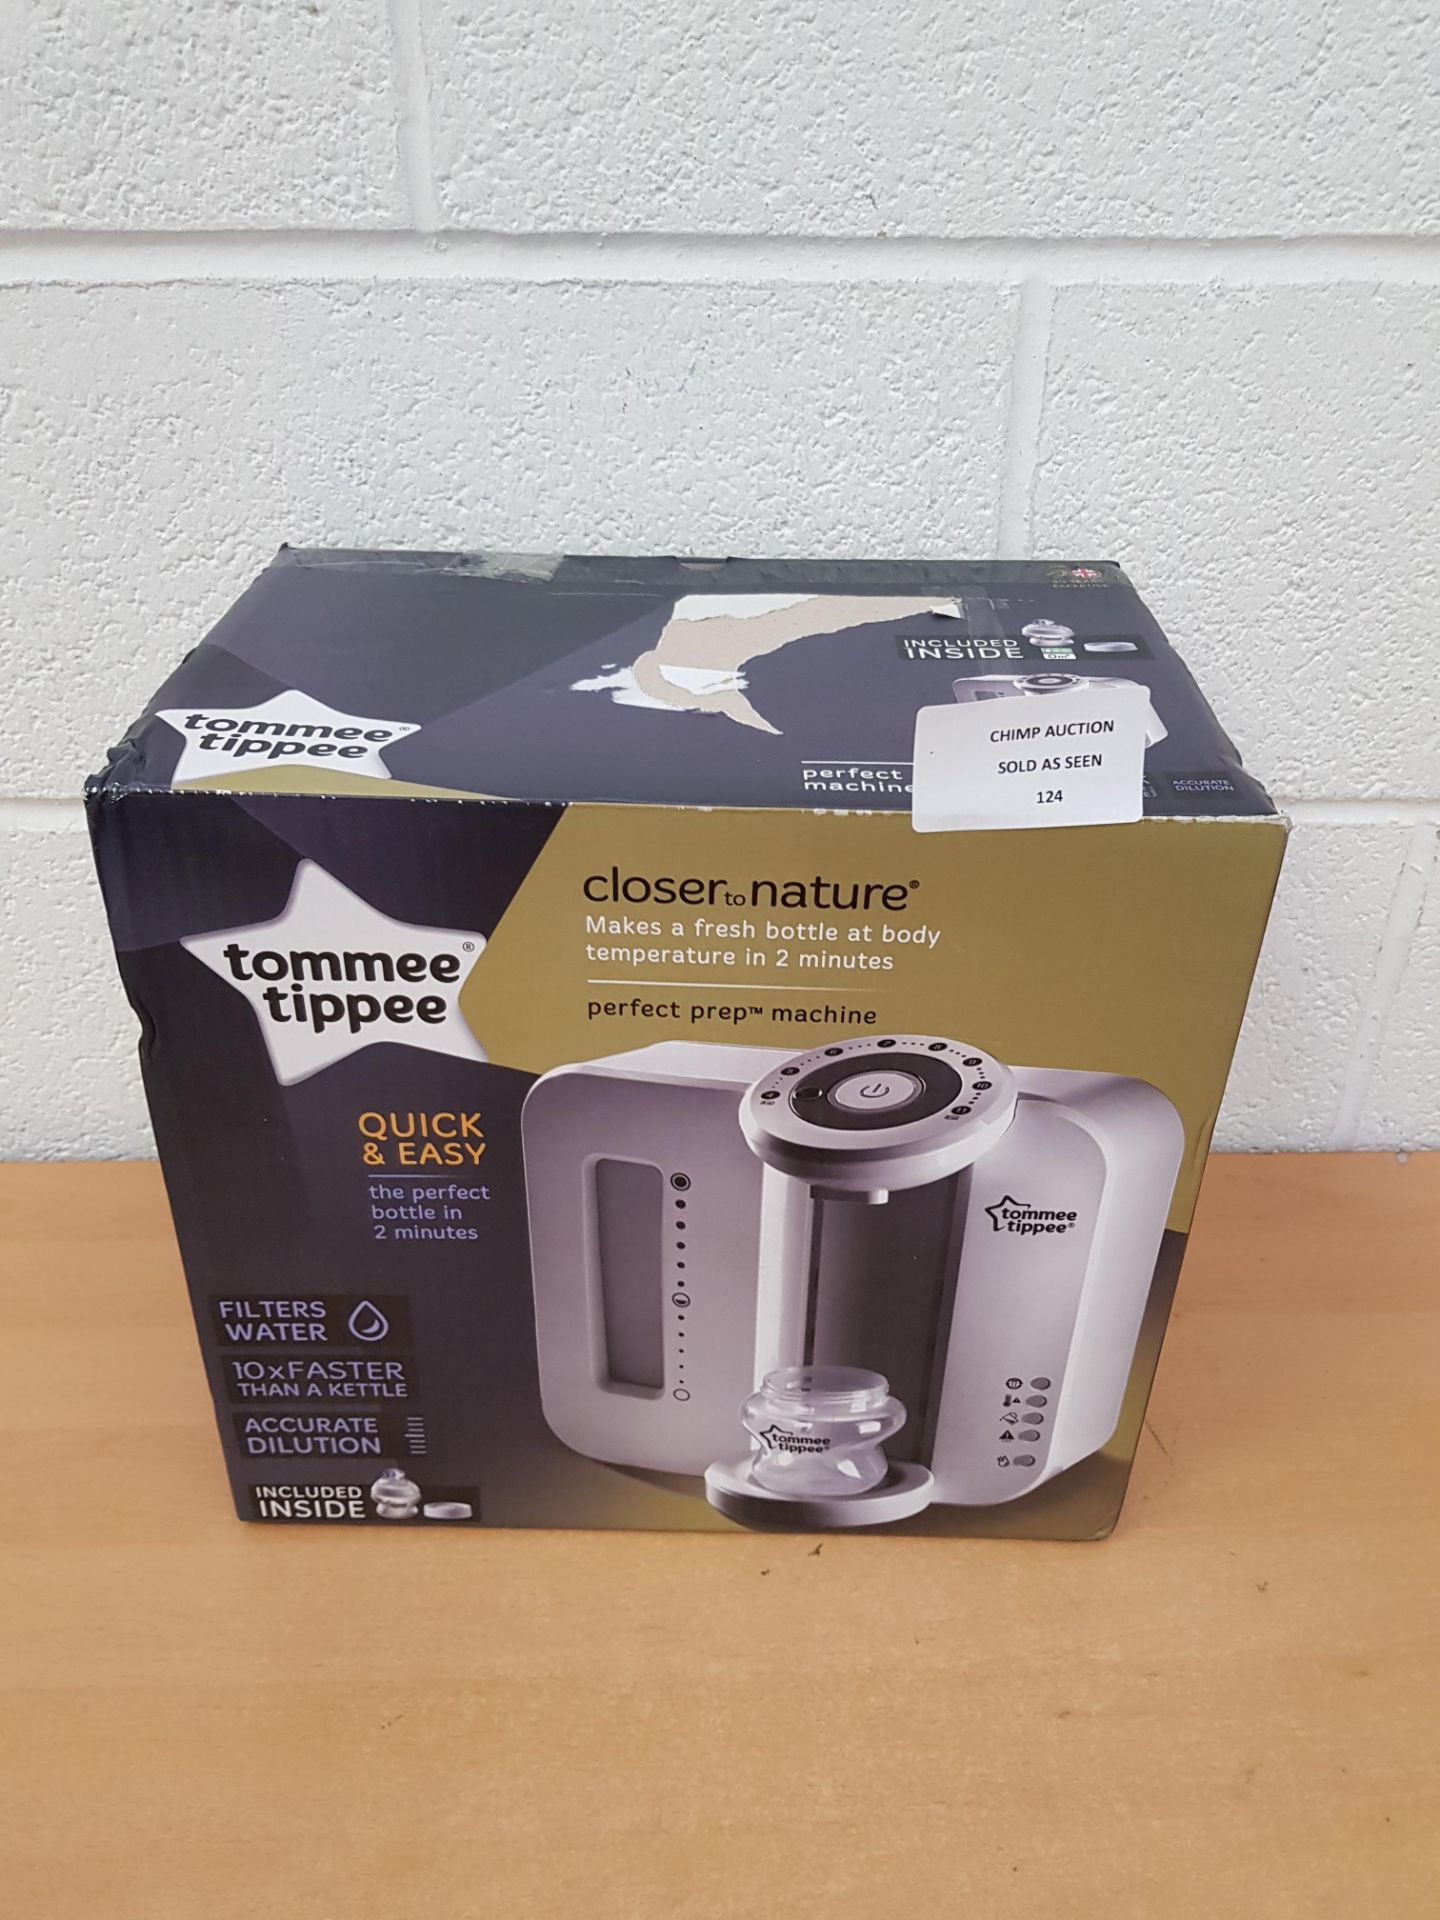 Tommee Tippee Perfect Prep machine RRP £119.99.